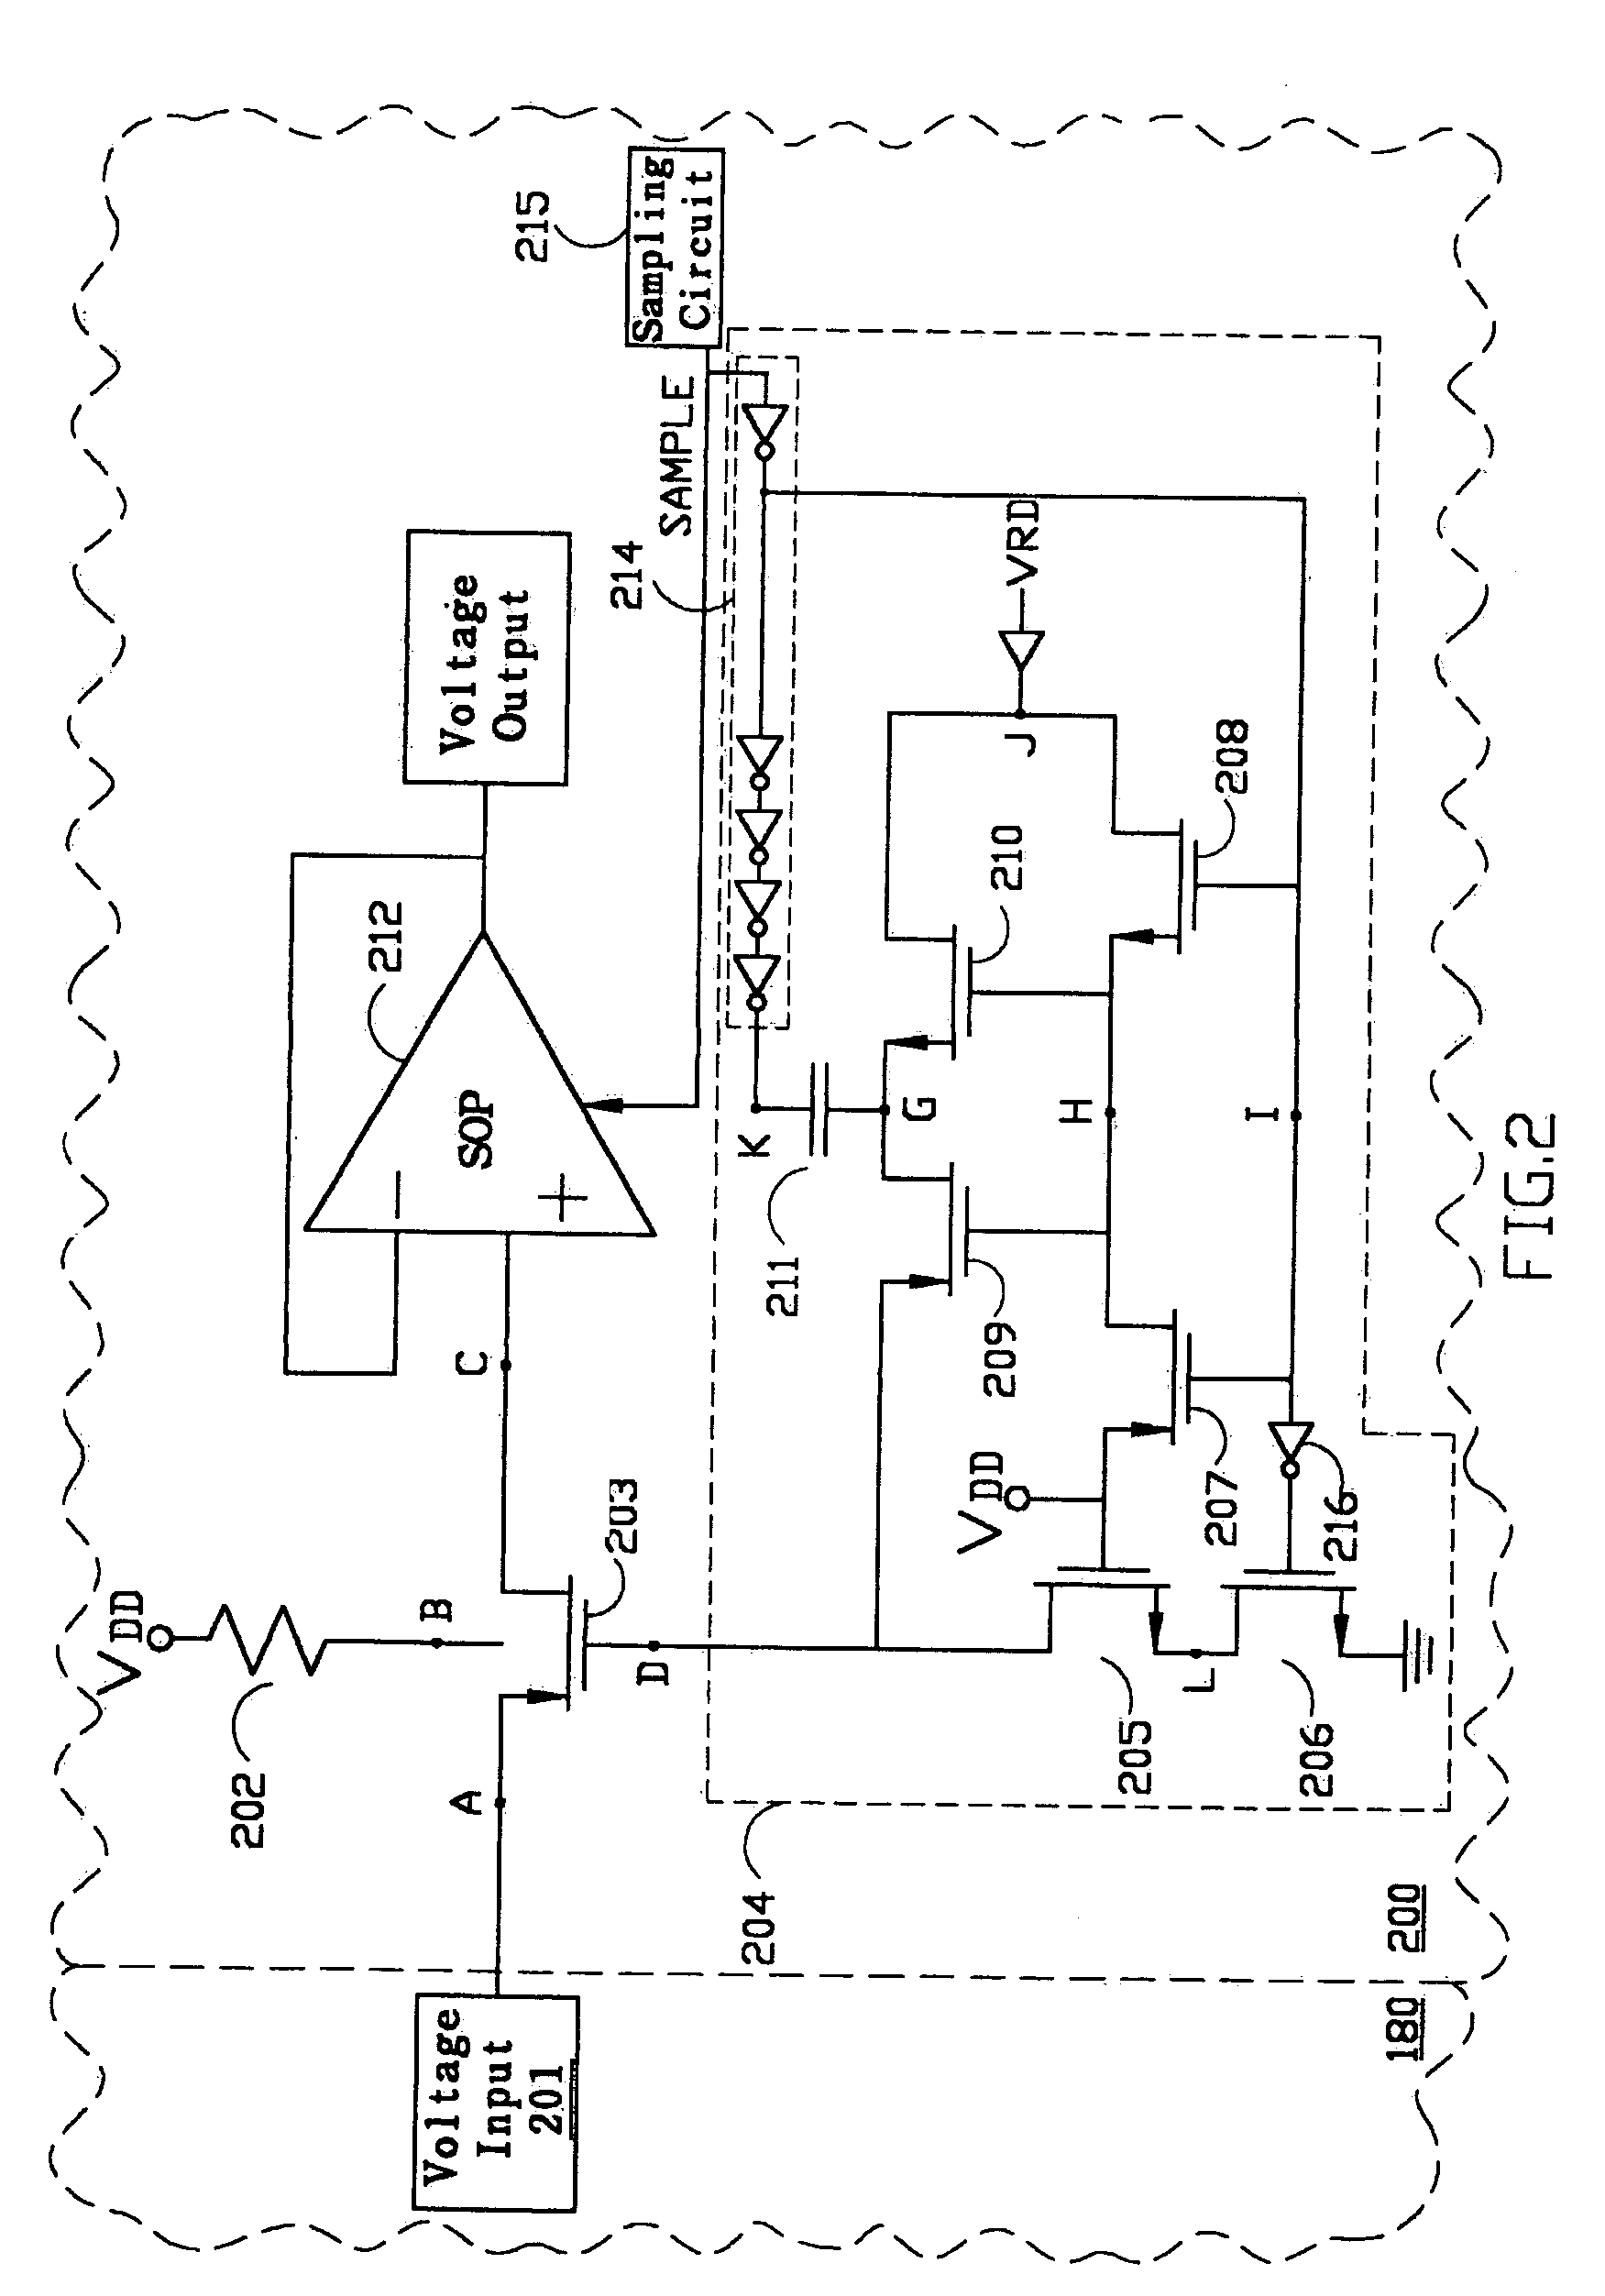 System of sampling interface for an optical pick-up head